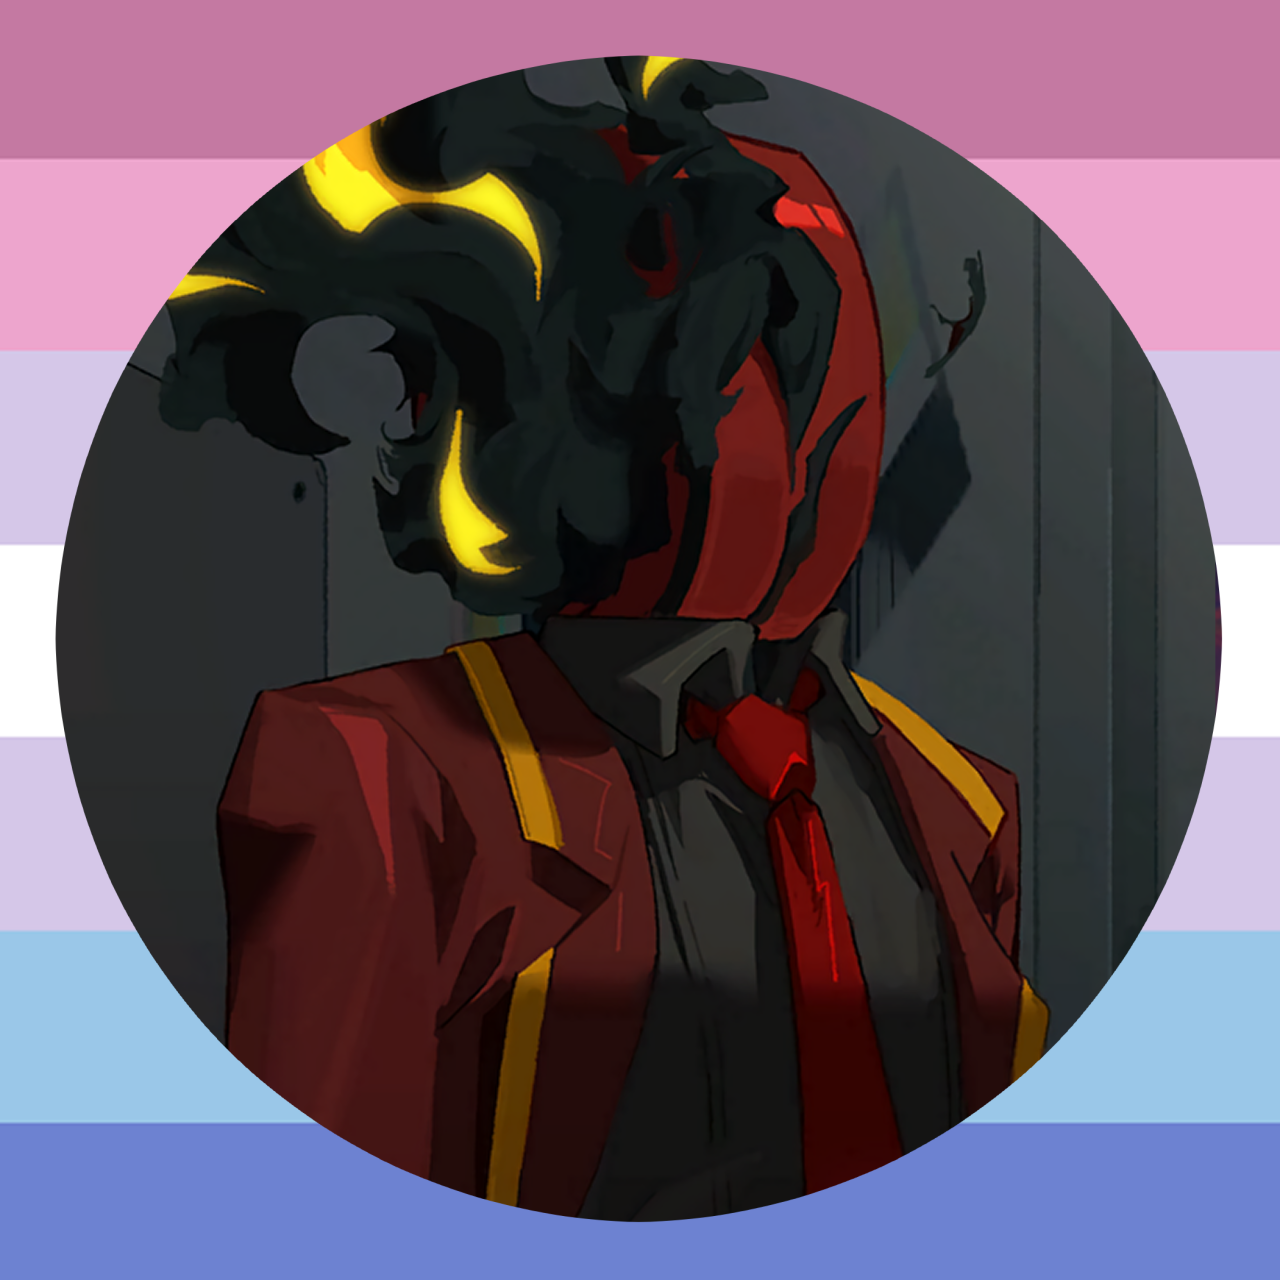 Made some bigender dante icons for fun bc i wanted a pride icon for discord, thought I’d share!
you can pry this headcanon from my cold dead hands.